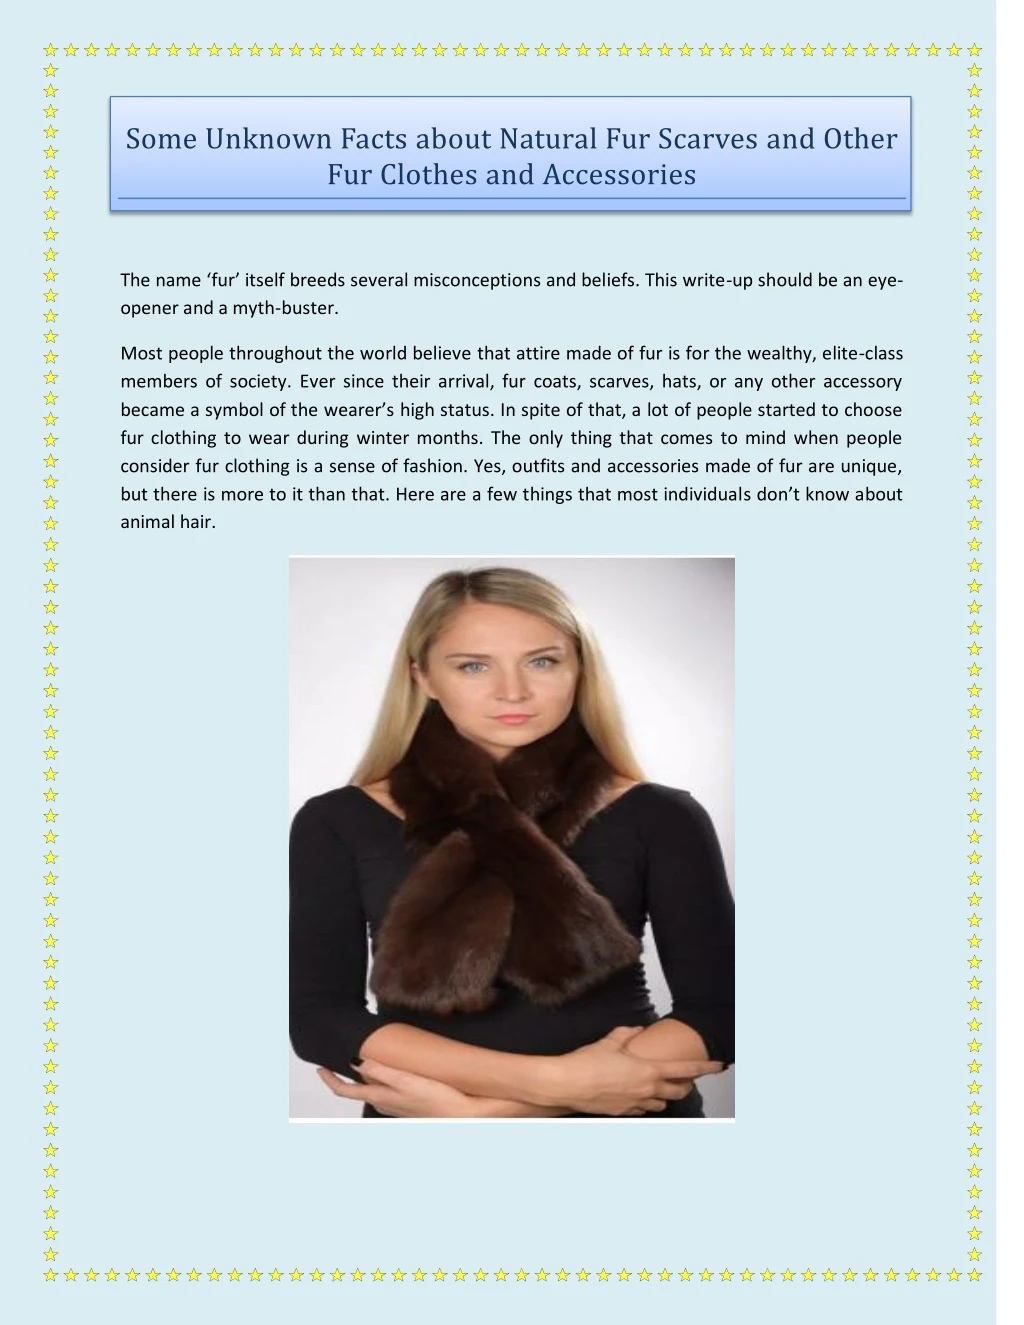 some unknown facts about natural fur scarves